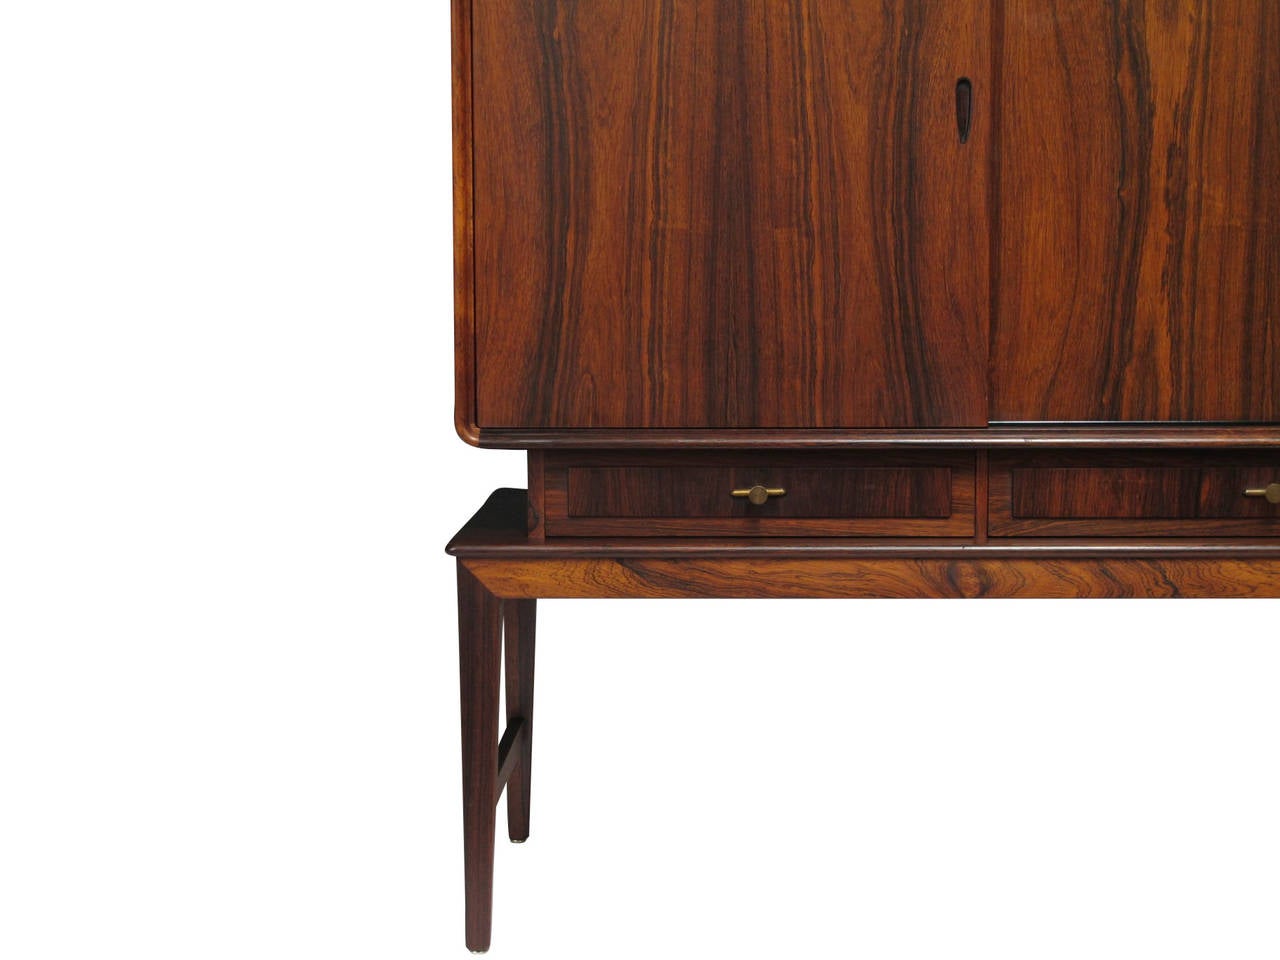 Early 1950s Rosewood sideboard with stunning book-matched grain and four sliding doors with adjustable shelves; above series of four drawers with brass pulls. Raised on stilted rosewood legs. Fine Scandinavian craftsmanship and joinery.